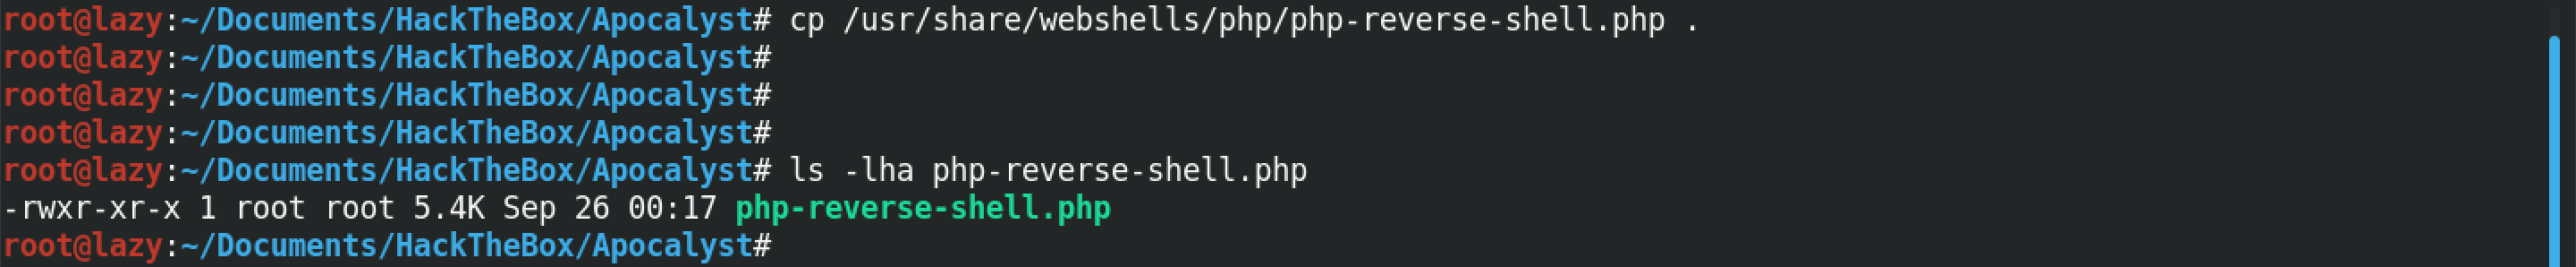 Copy the PHP reverse shell file to the current working directory.